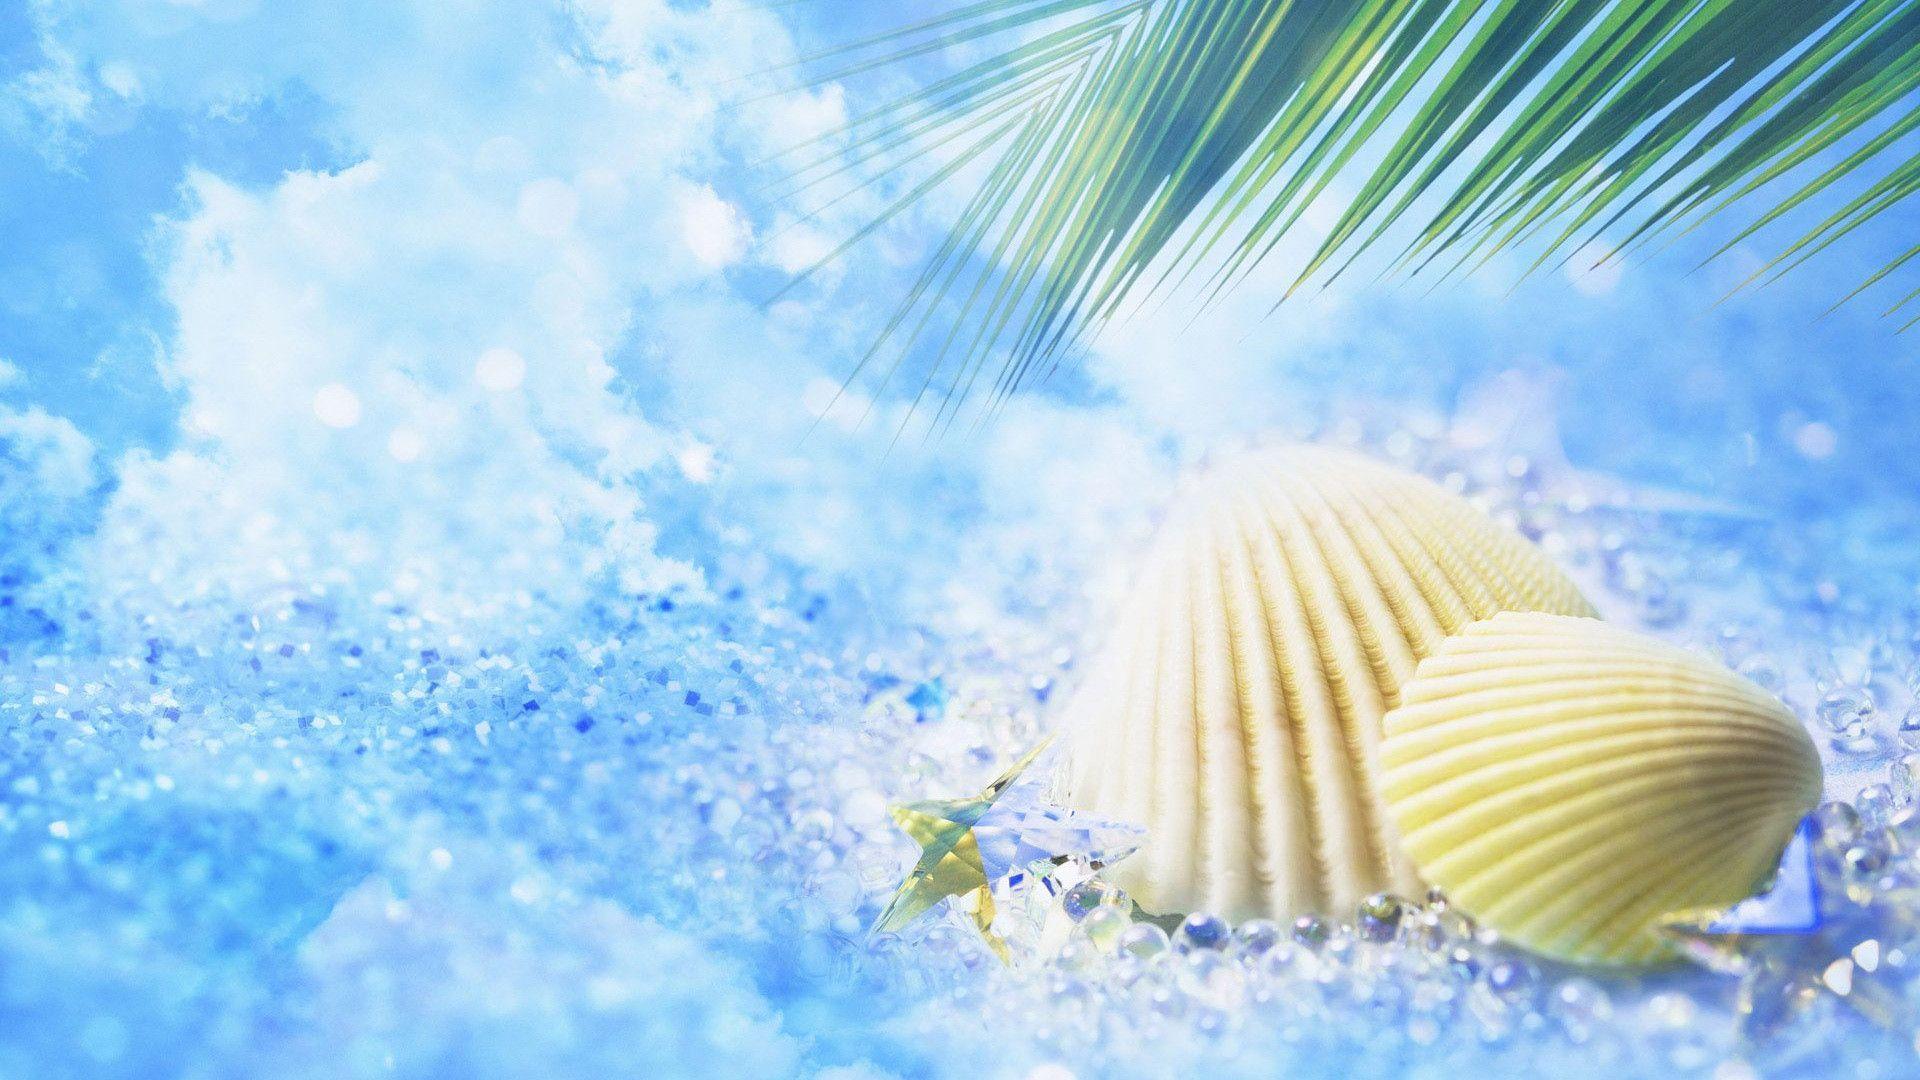 Summer Wallpaper 2014 HD Hd Picture 4 HD Wallpaper. Hdimges